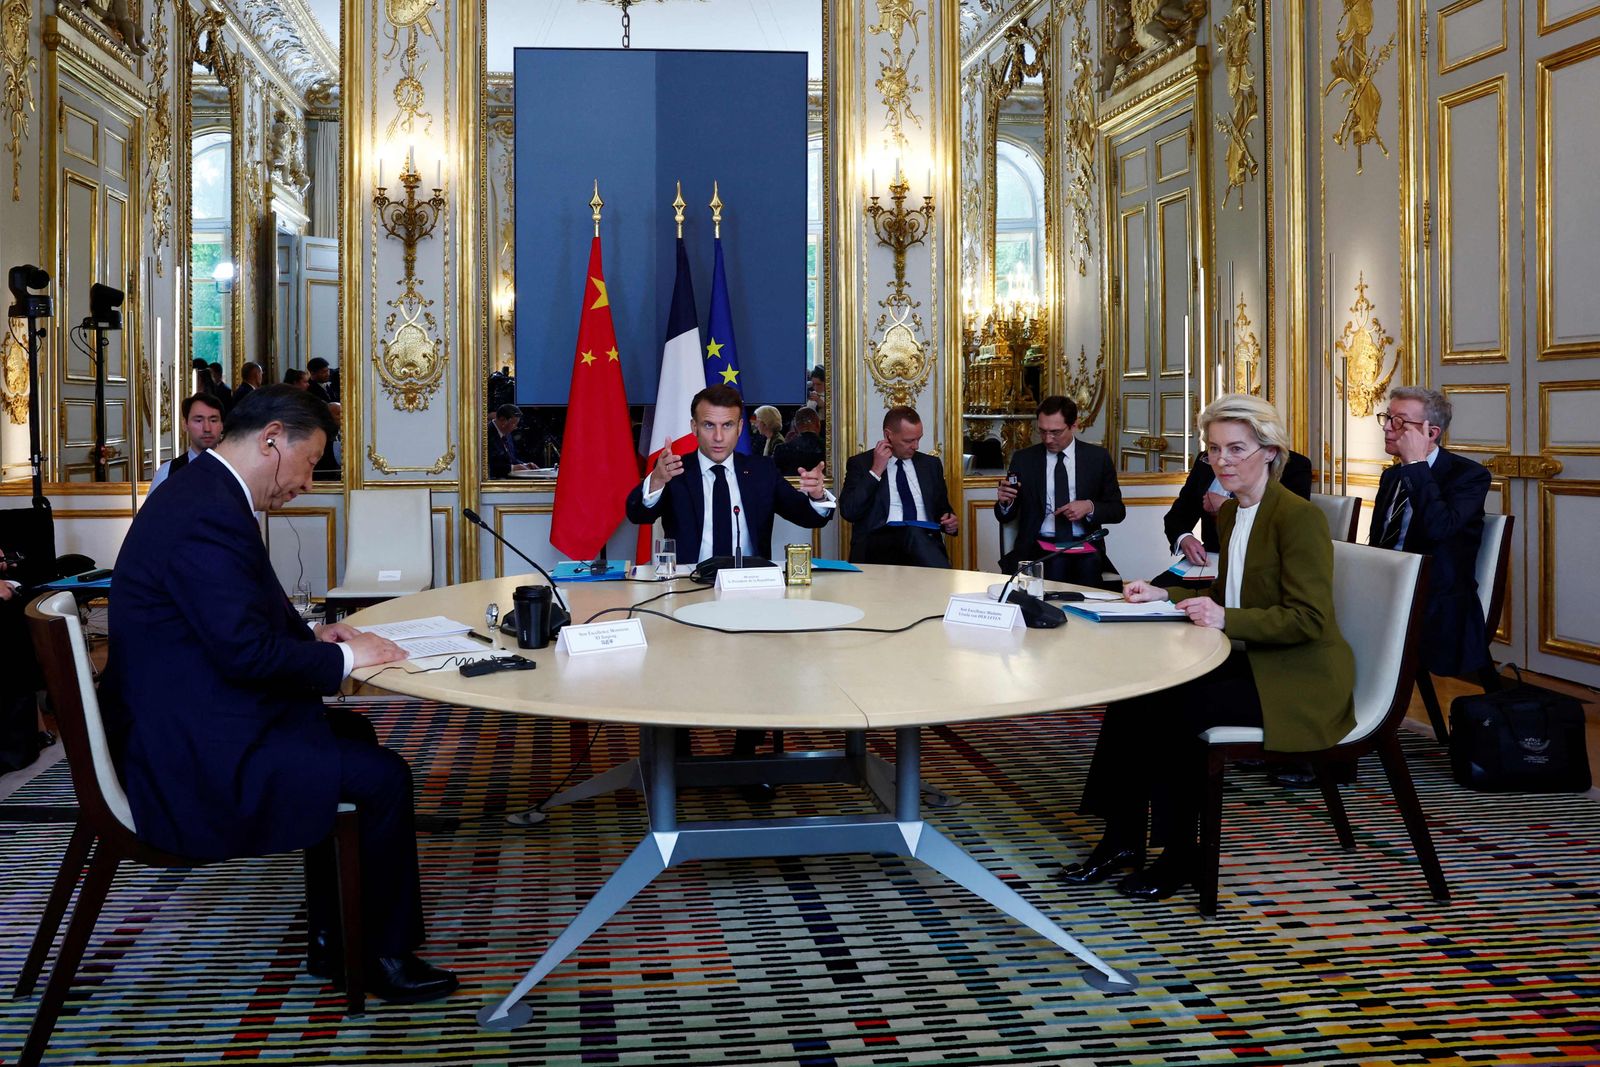 (From L) Chinese President Xi Jinping, France's President Emmanuel Macron, and European Commission President Ursula von der Leyen hold a trilateral meeting as part of the Chinese president's two-day state visit, at the Elysee Palace in Paris, on May 6, 2024. French President Emmanuel Macron is to host Xi Jinping for a state visit on May 6, 2024, seeking to persuade the Chinese leader to shift positions over Russia's invasion of Ukraine and also imbalances in global trade. Xi's first visit to Europe since 2019 will also see him hold talks in Serbia and Hungary. Xi has said he wants to find peace in Ukraine even if analysts do not expect major changes in Chinese policy. (Photo by Gonzalo Fuentes / POOL / AFP)